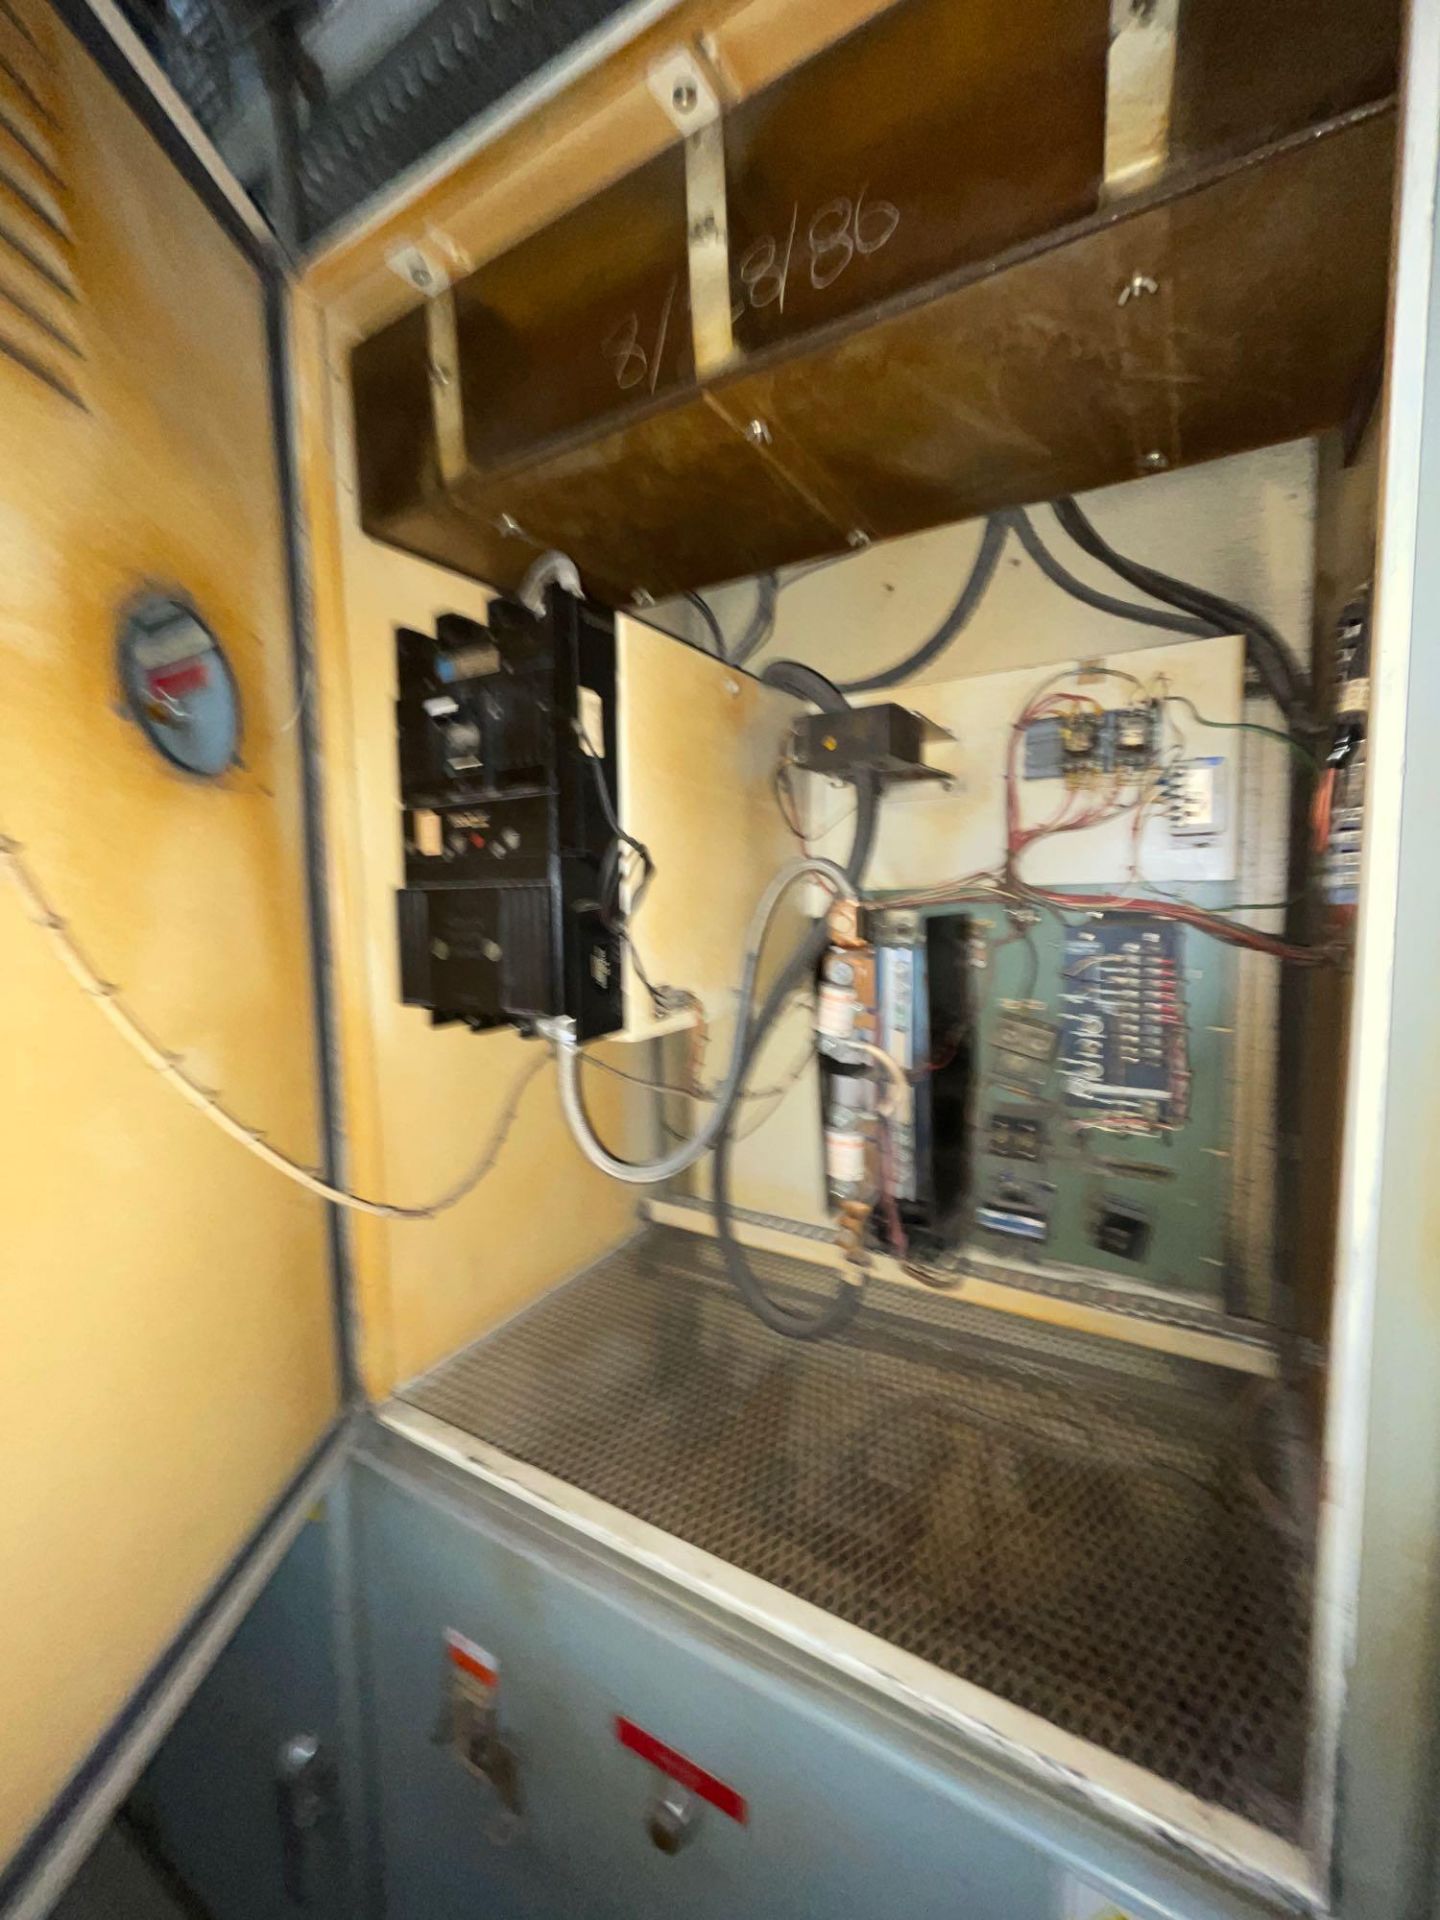 Glass Pane Bending Oven Furnace with Electrical Cabinets - Image 33 of 68